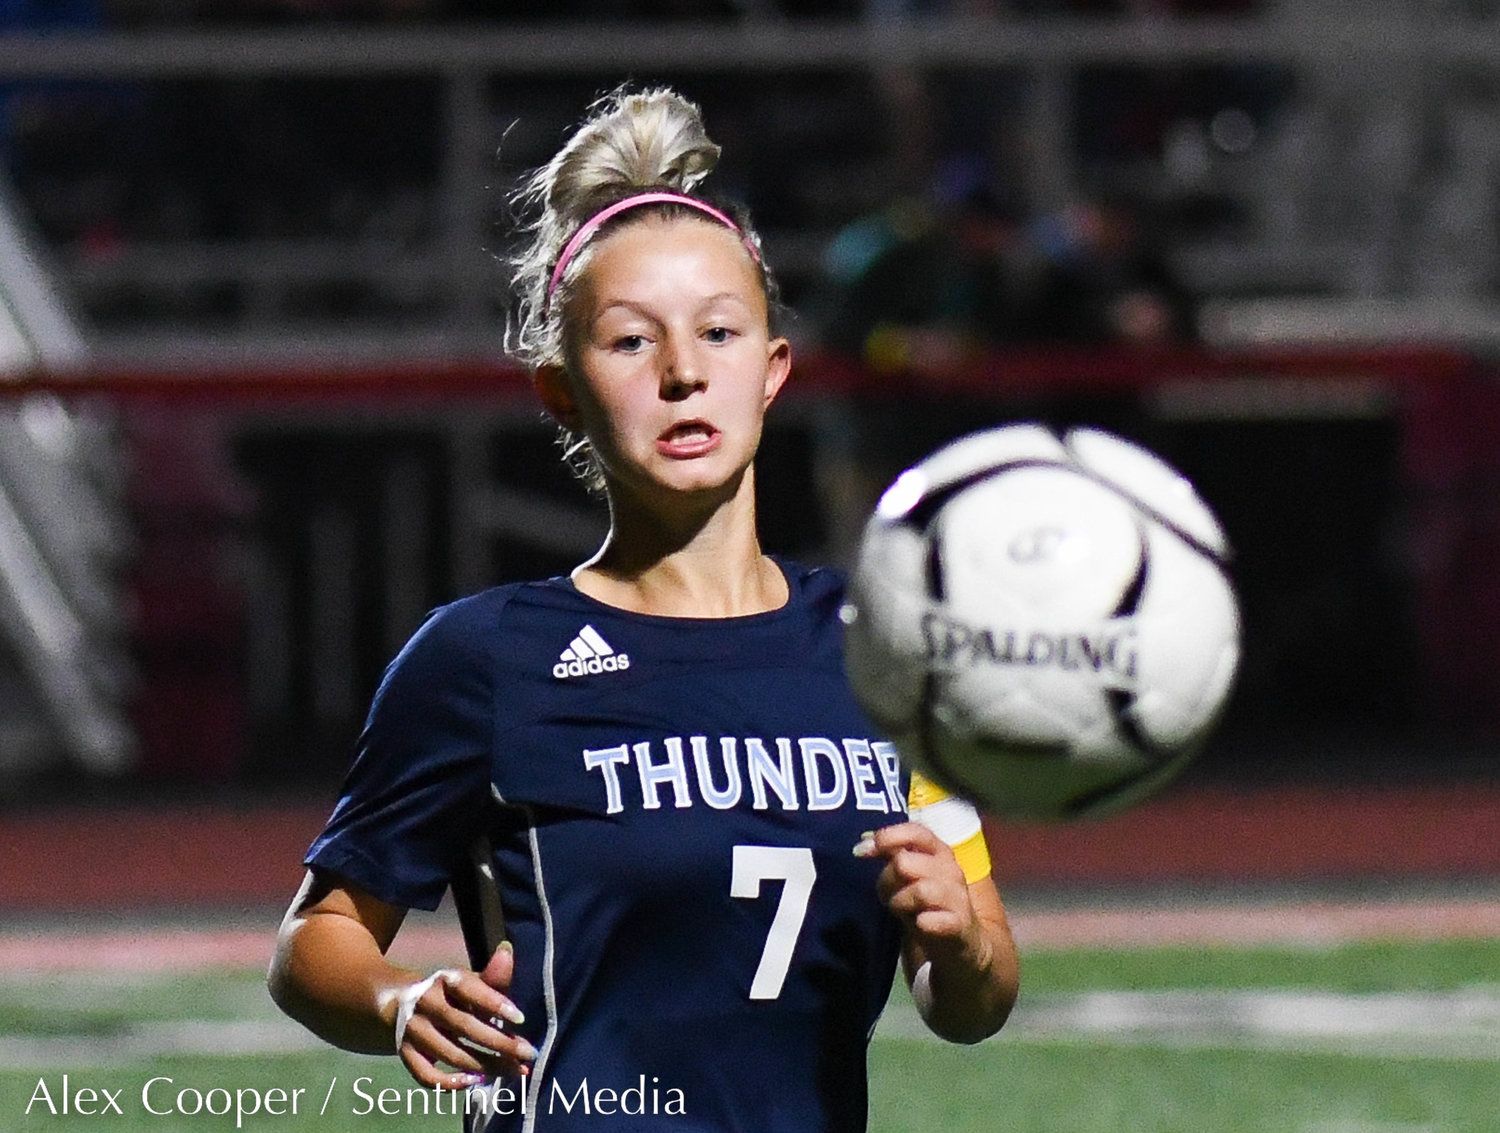 Central Valley Academy player Mallory Mower (7) watches a ball sail out of bounds during the Class B girls soccer semifinals game against Marcellus on Wednesday, Oct. 26 at Chittenango High School. CVA won 2-0.